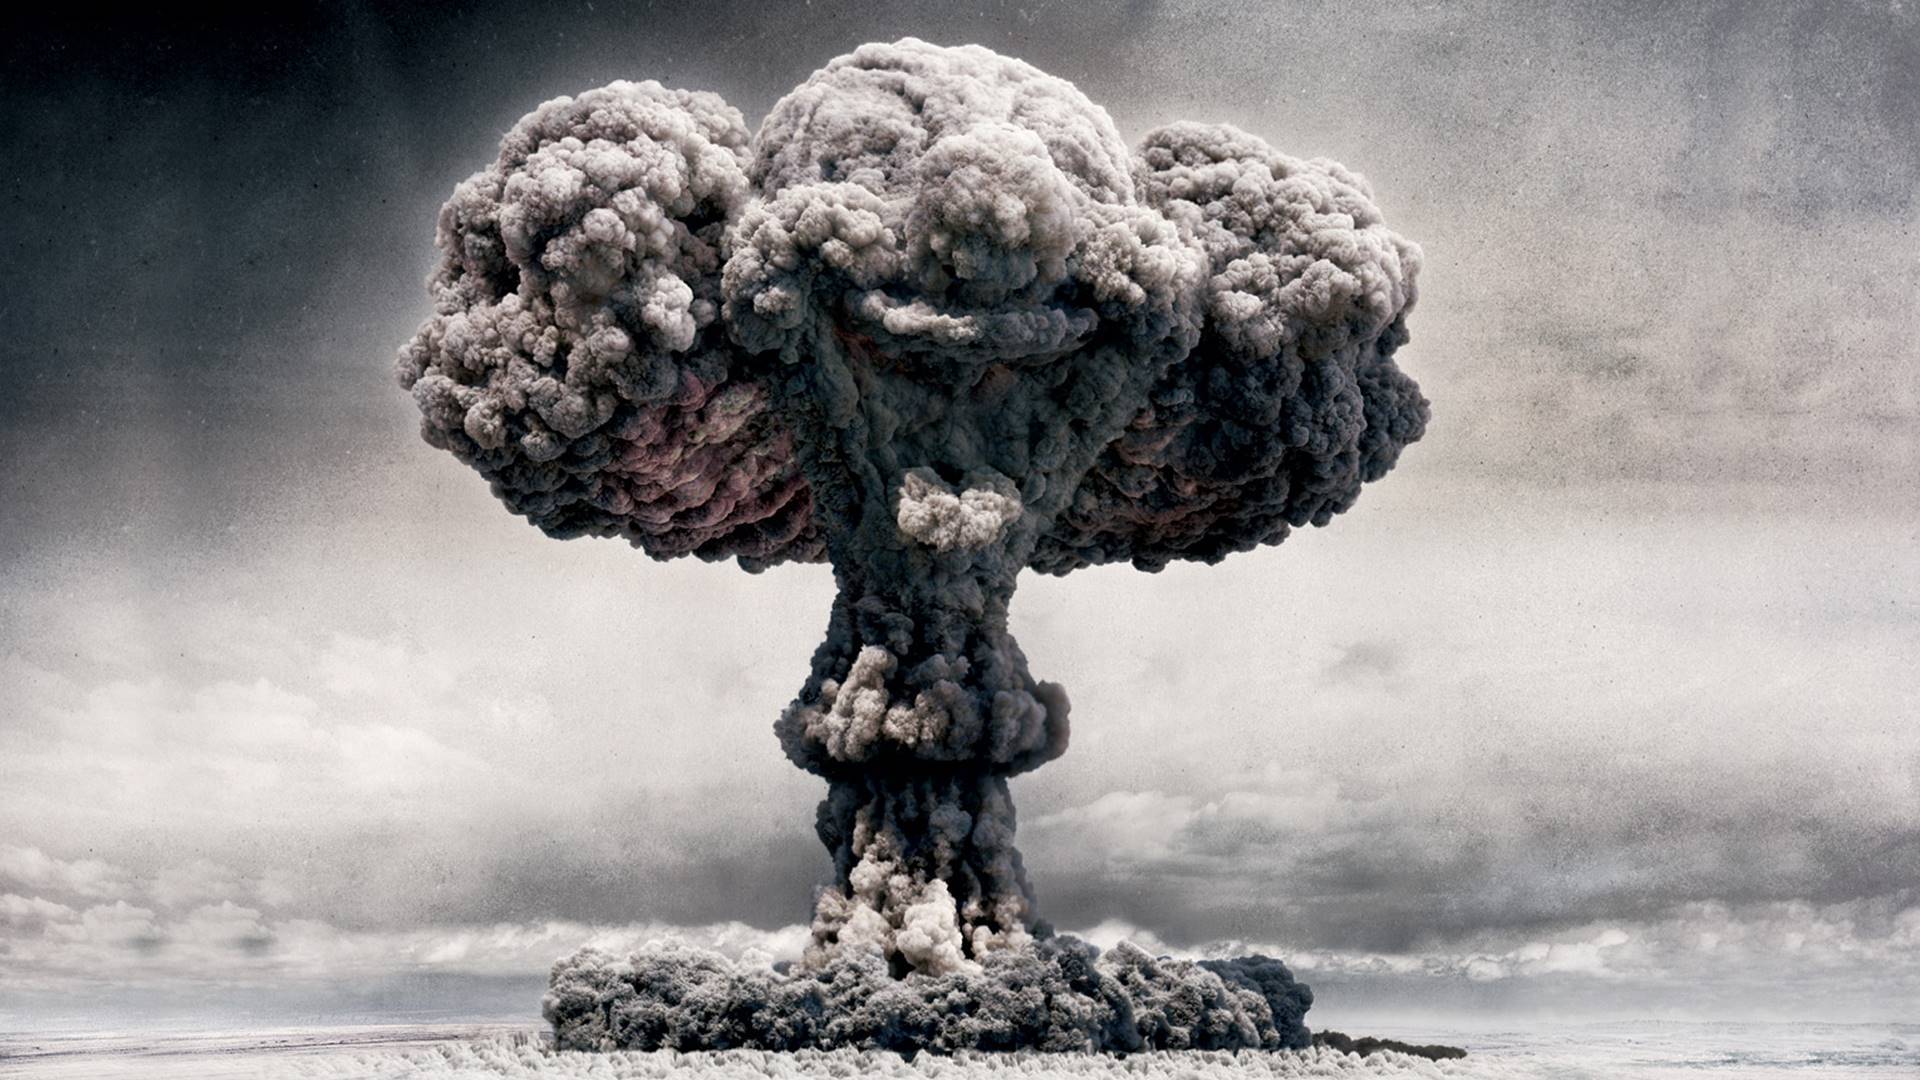 14 Nuclear HD Wallpapers Backgrounds - Wallpaper Abyss